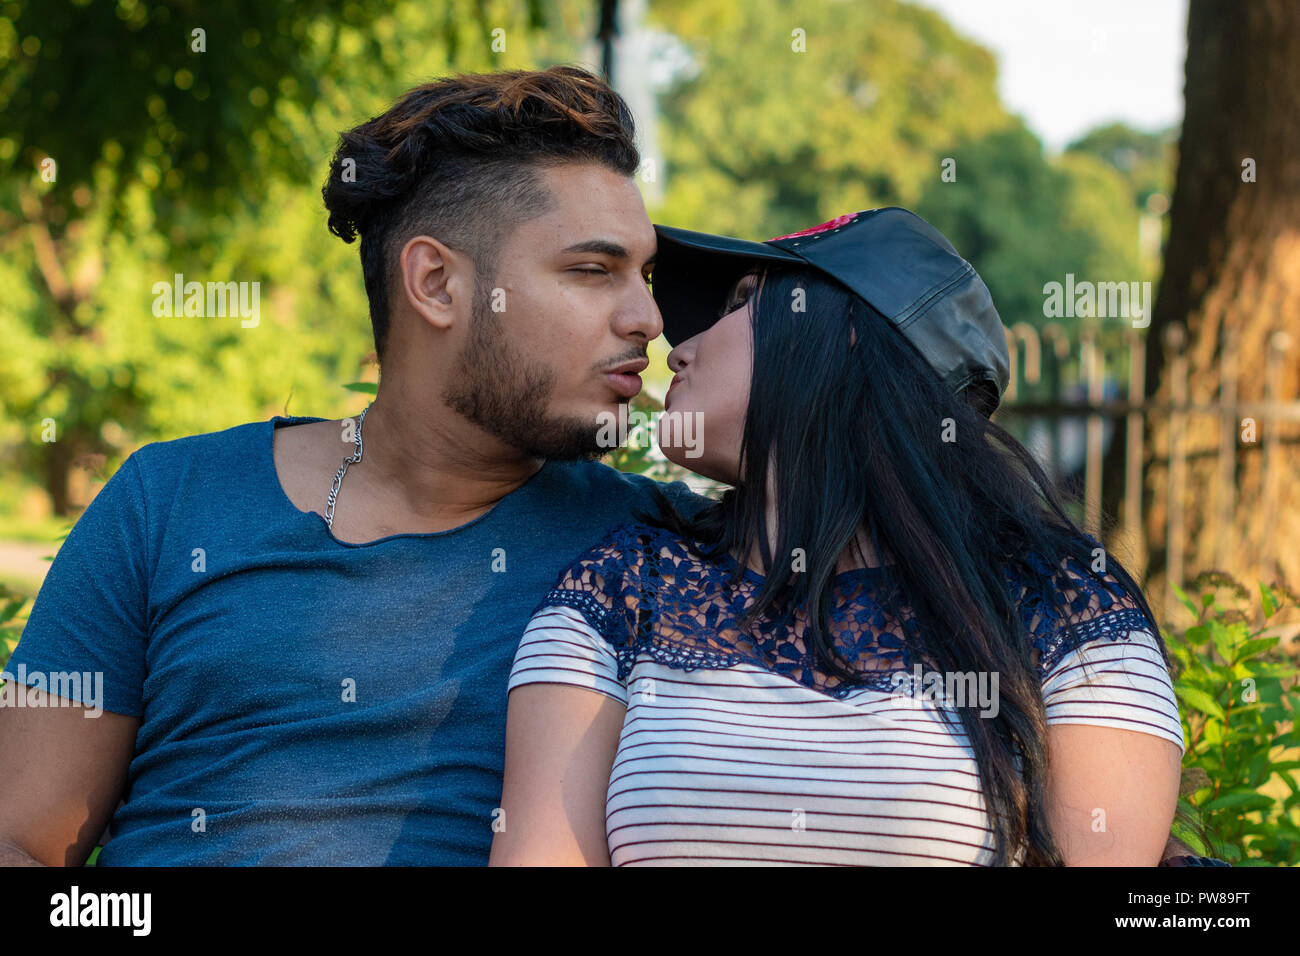 RIGA, LATVIA - JULY 26, 2018: Young couple in love kissing in the park. Stock Photo